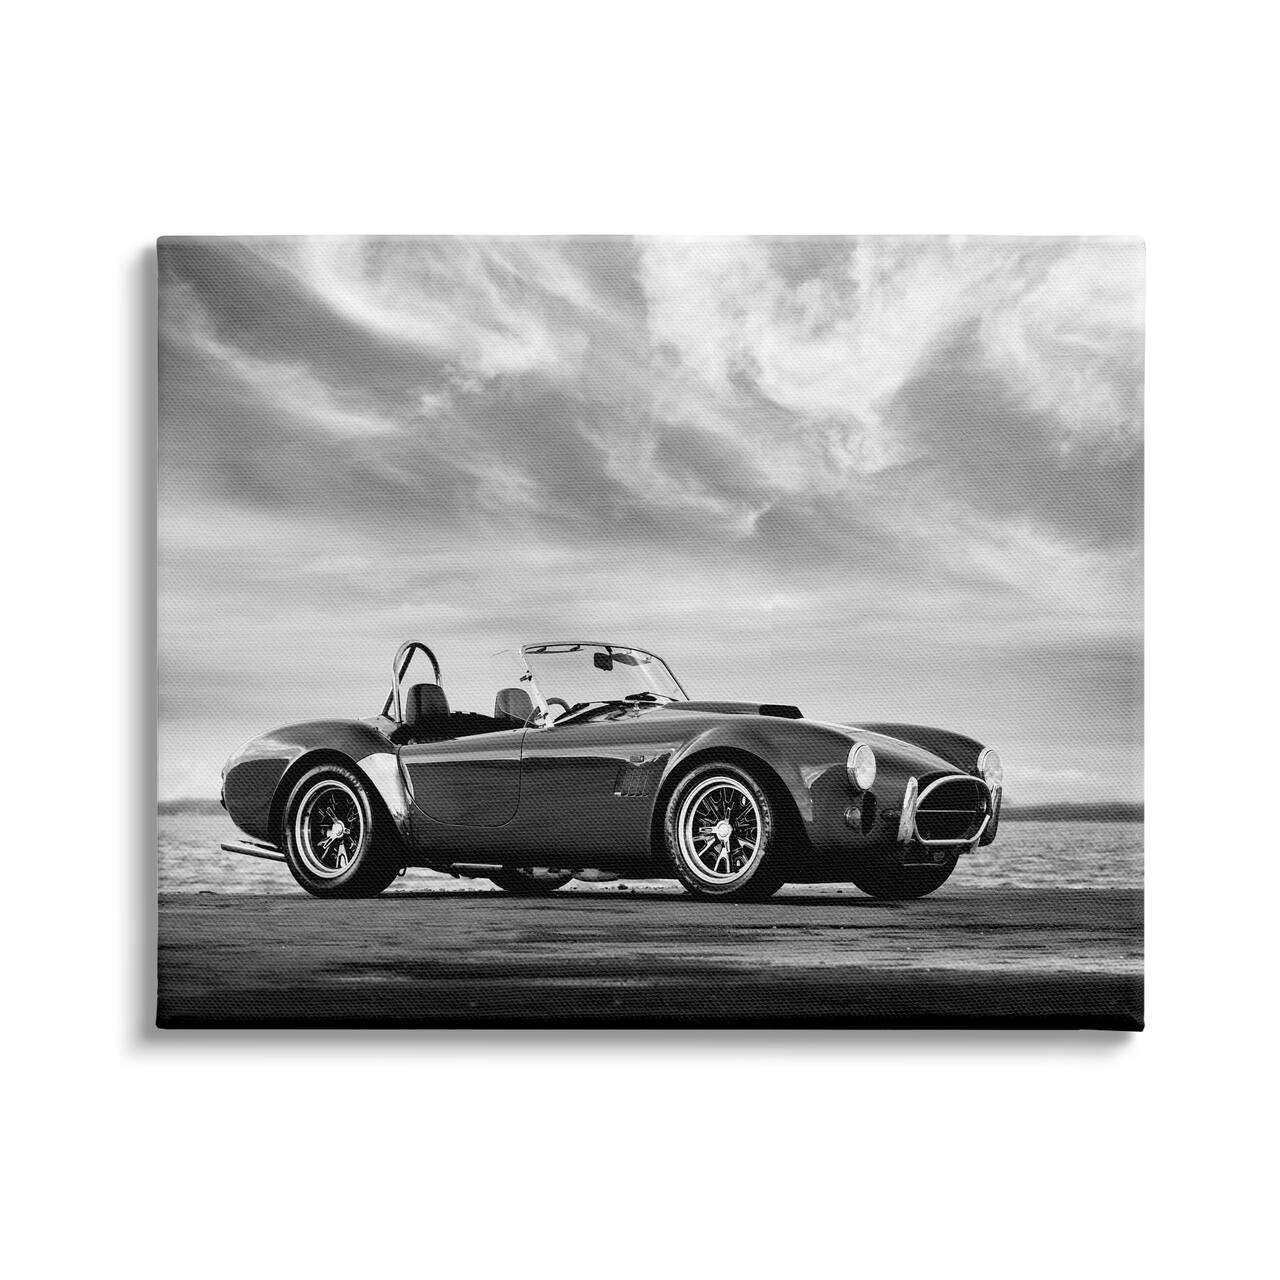 Stupell Industries Vintage Sports Convertible Car Beach Photography Black White Canvas Wall Art